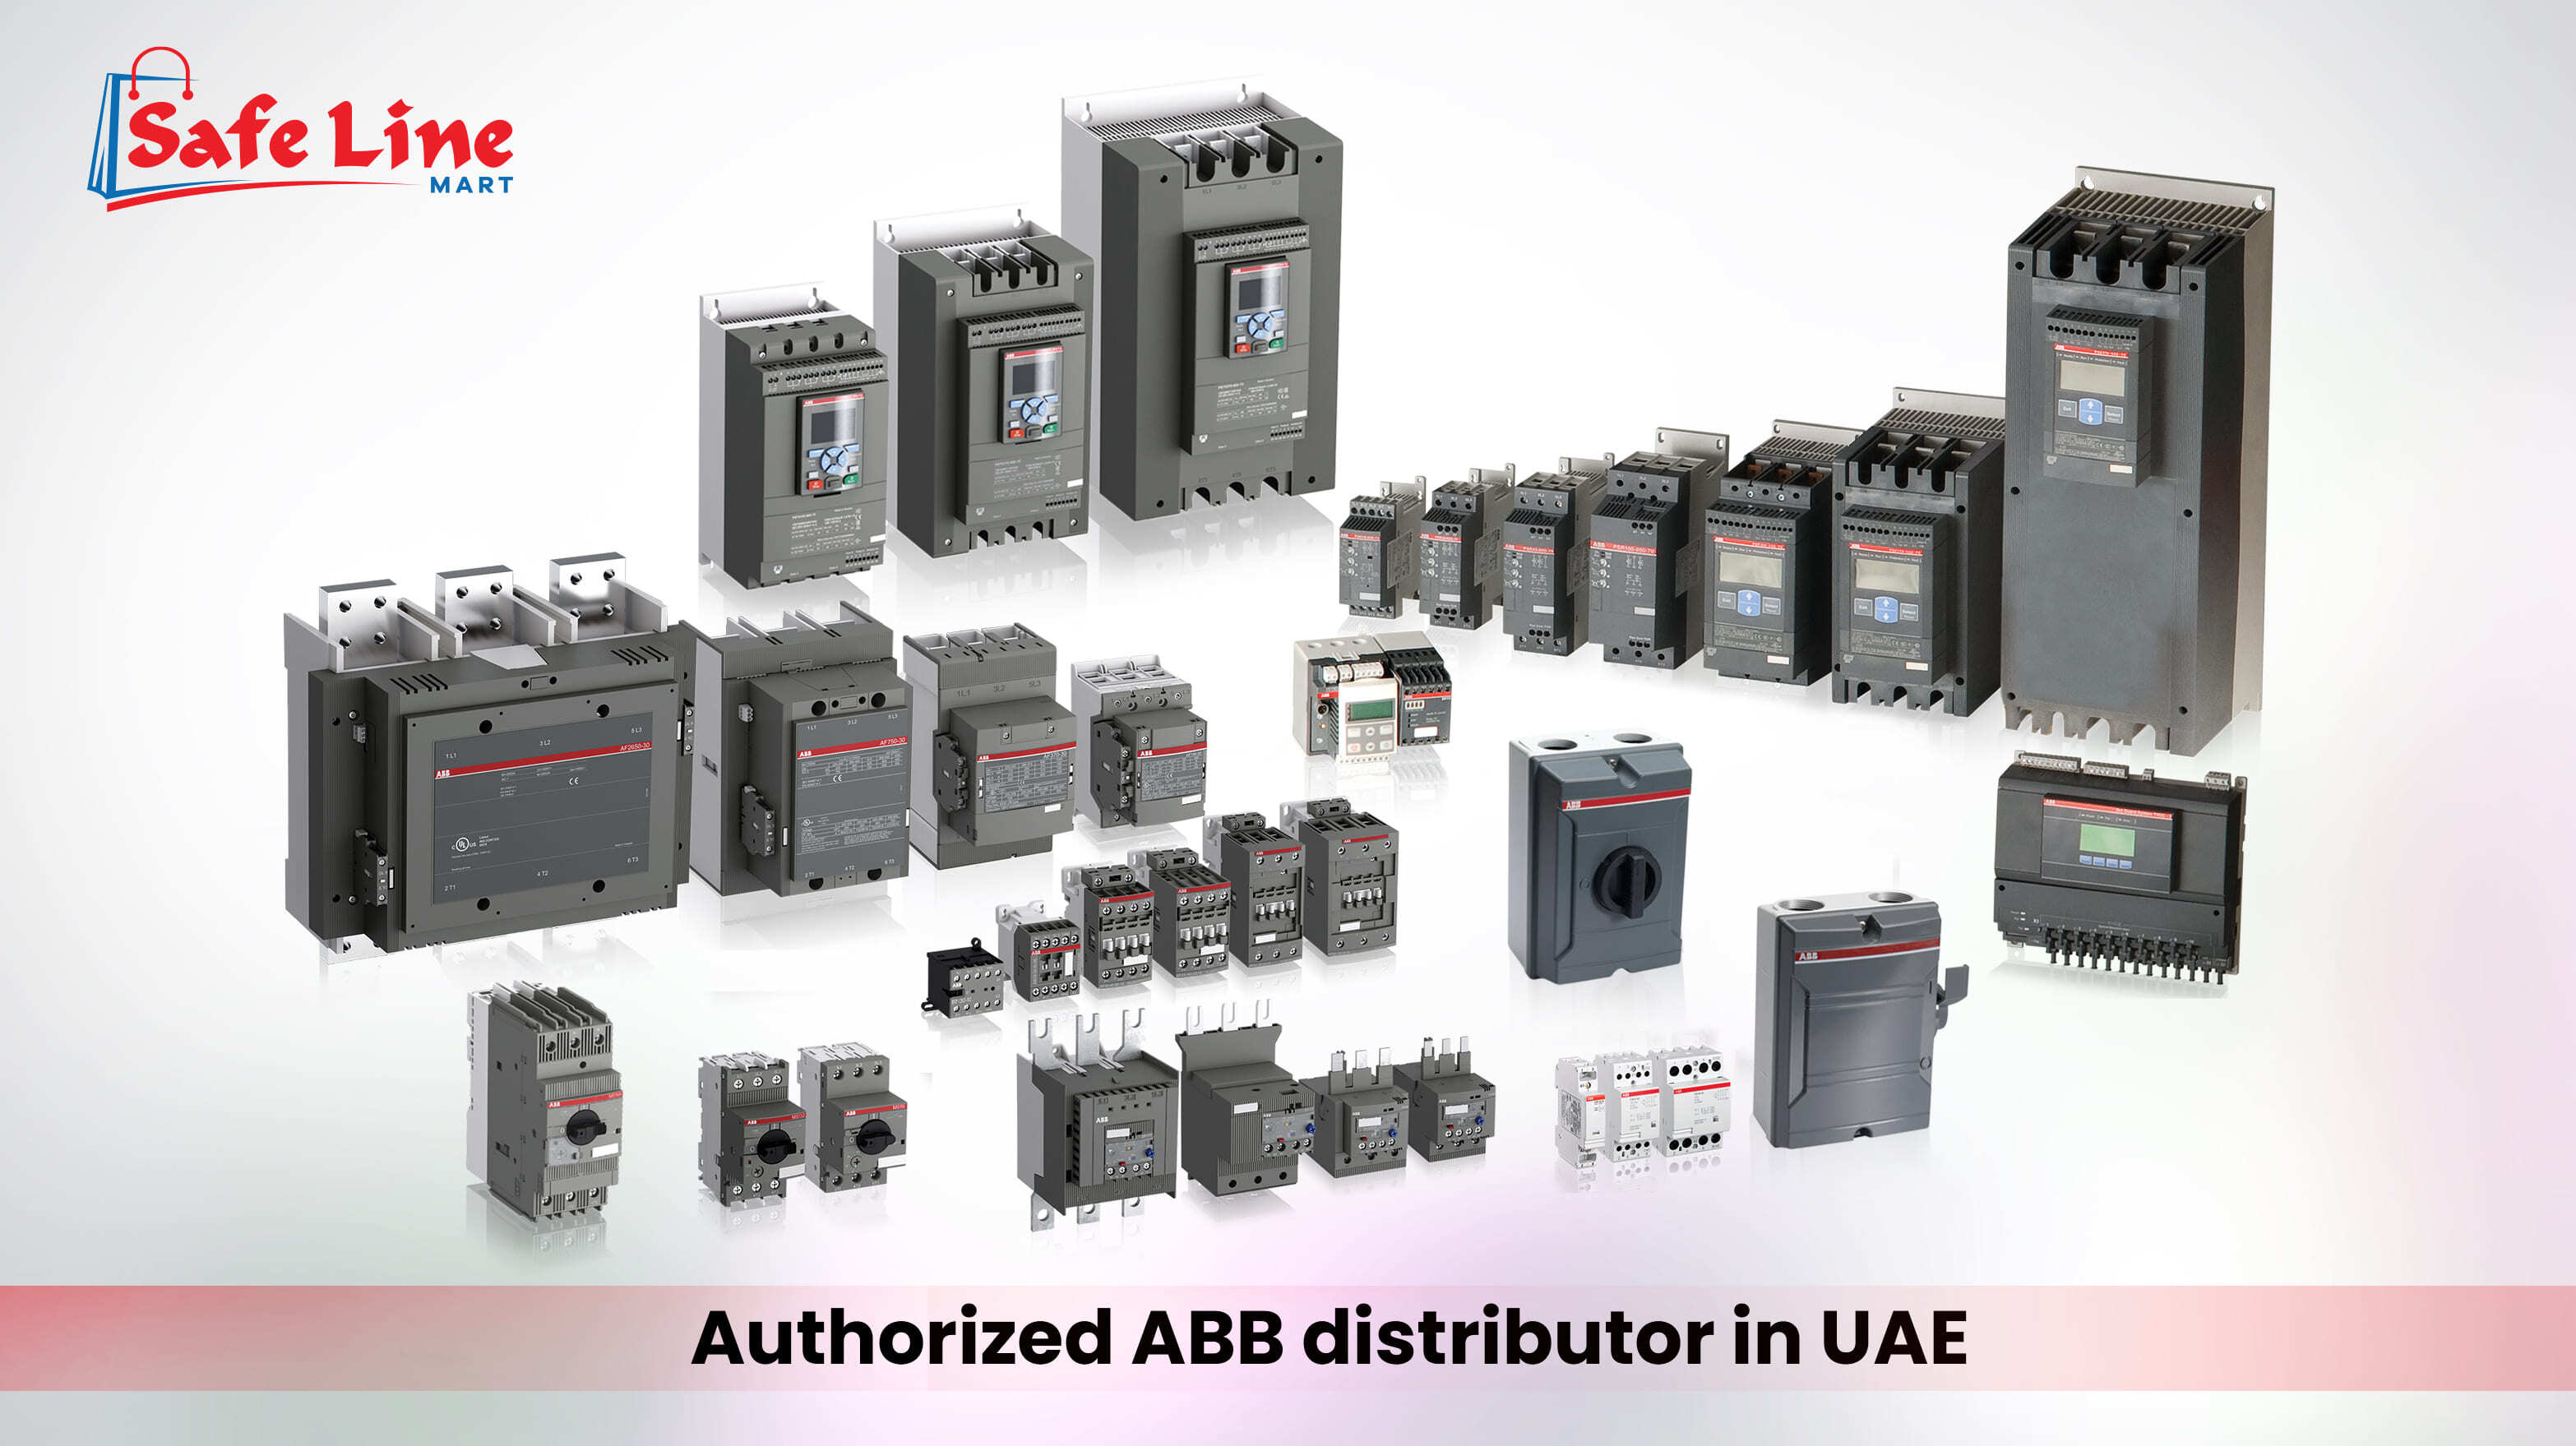 Elevate Your Business with Safe Line Mart: Trusted ABB Supplier in the UAE